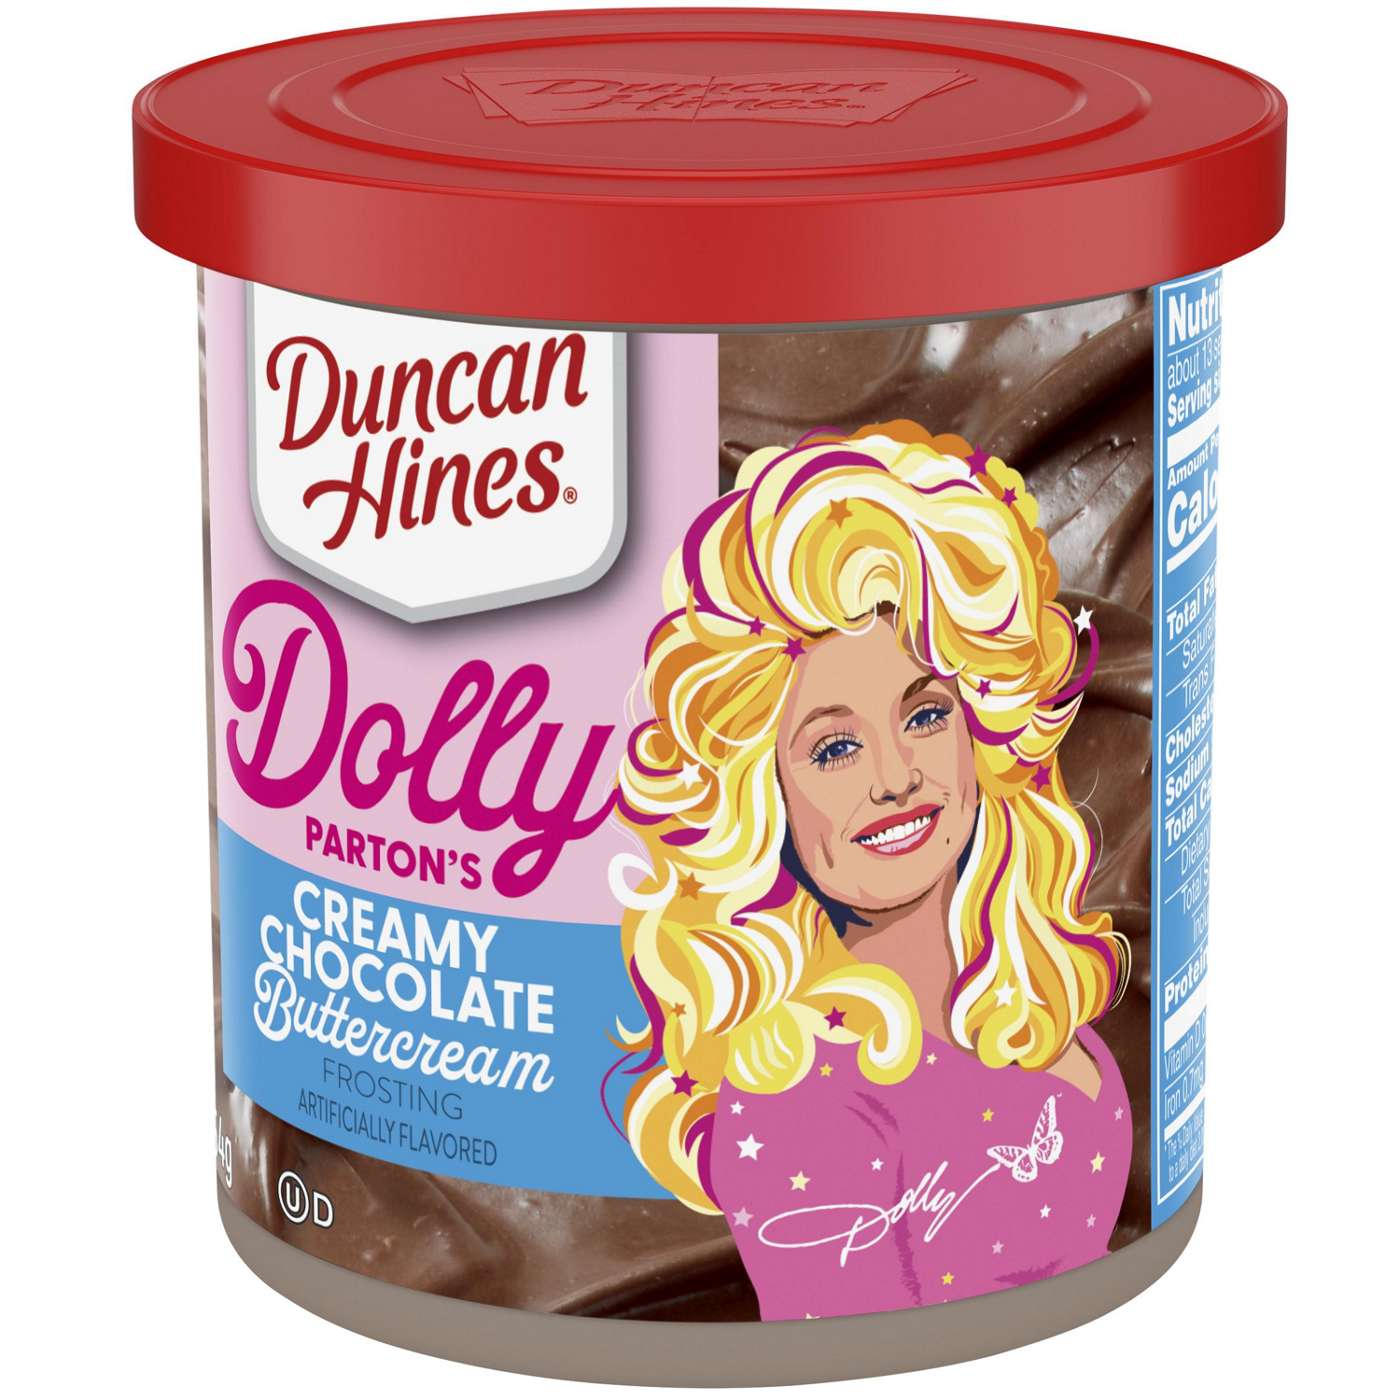 Duncan Hines Dolly Parton's Creamy Chocolate Buttercream Frosting; image 2 of 3